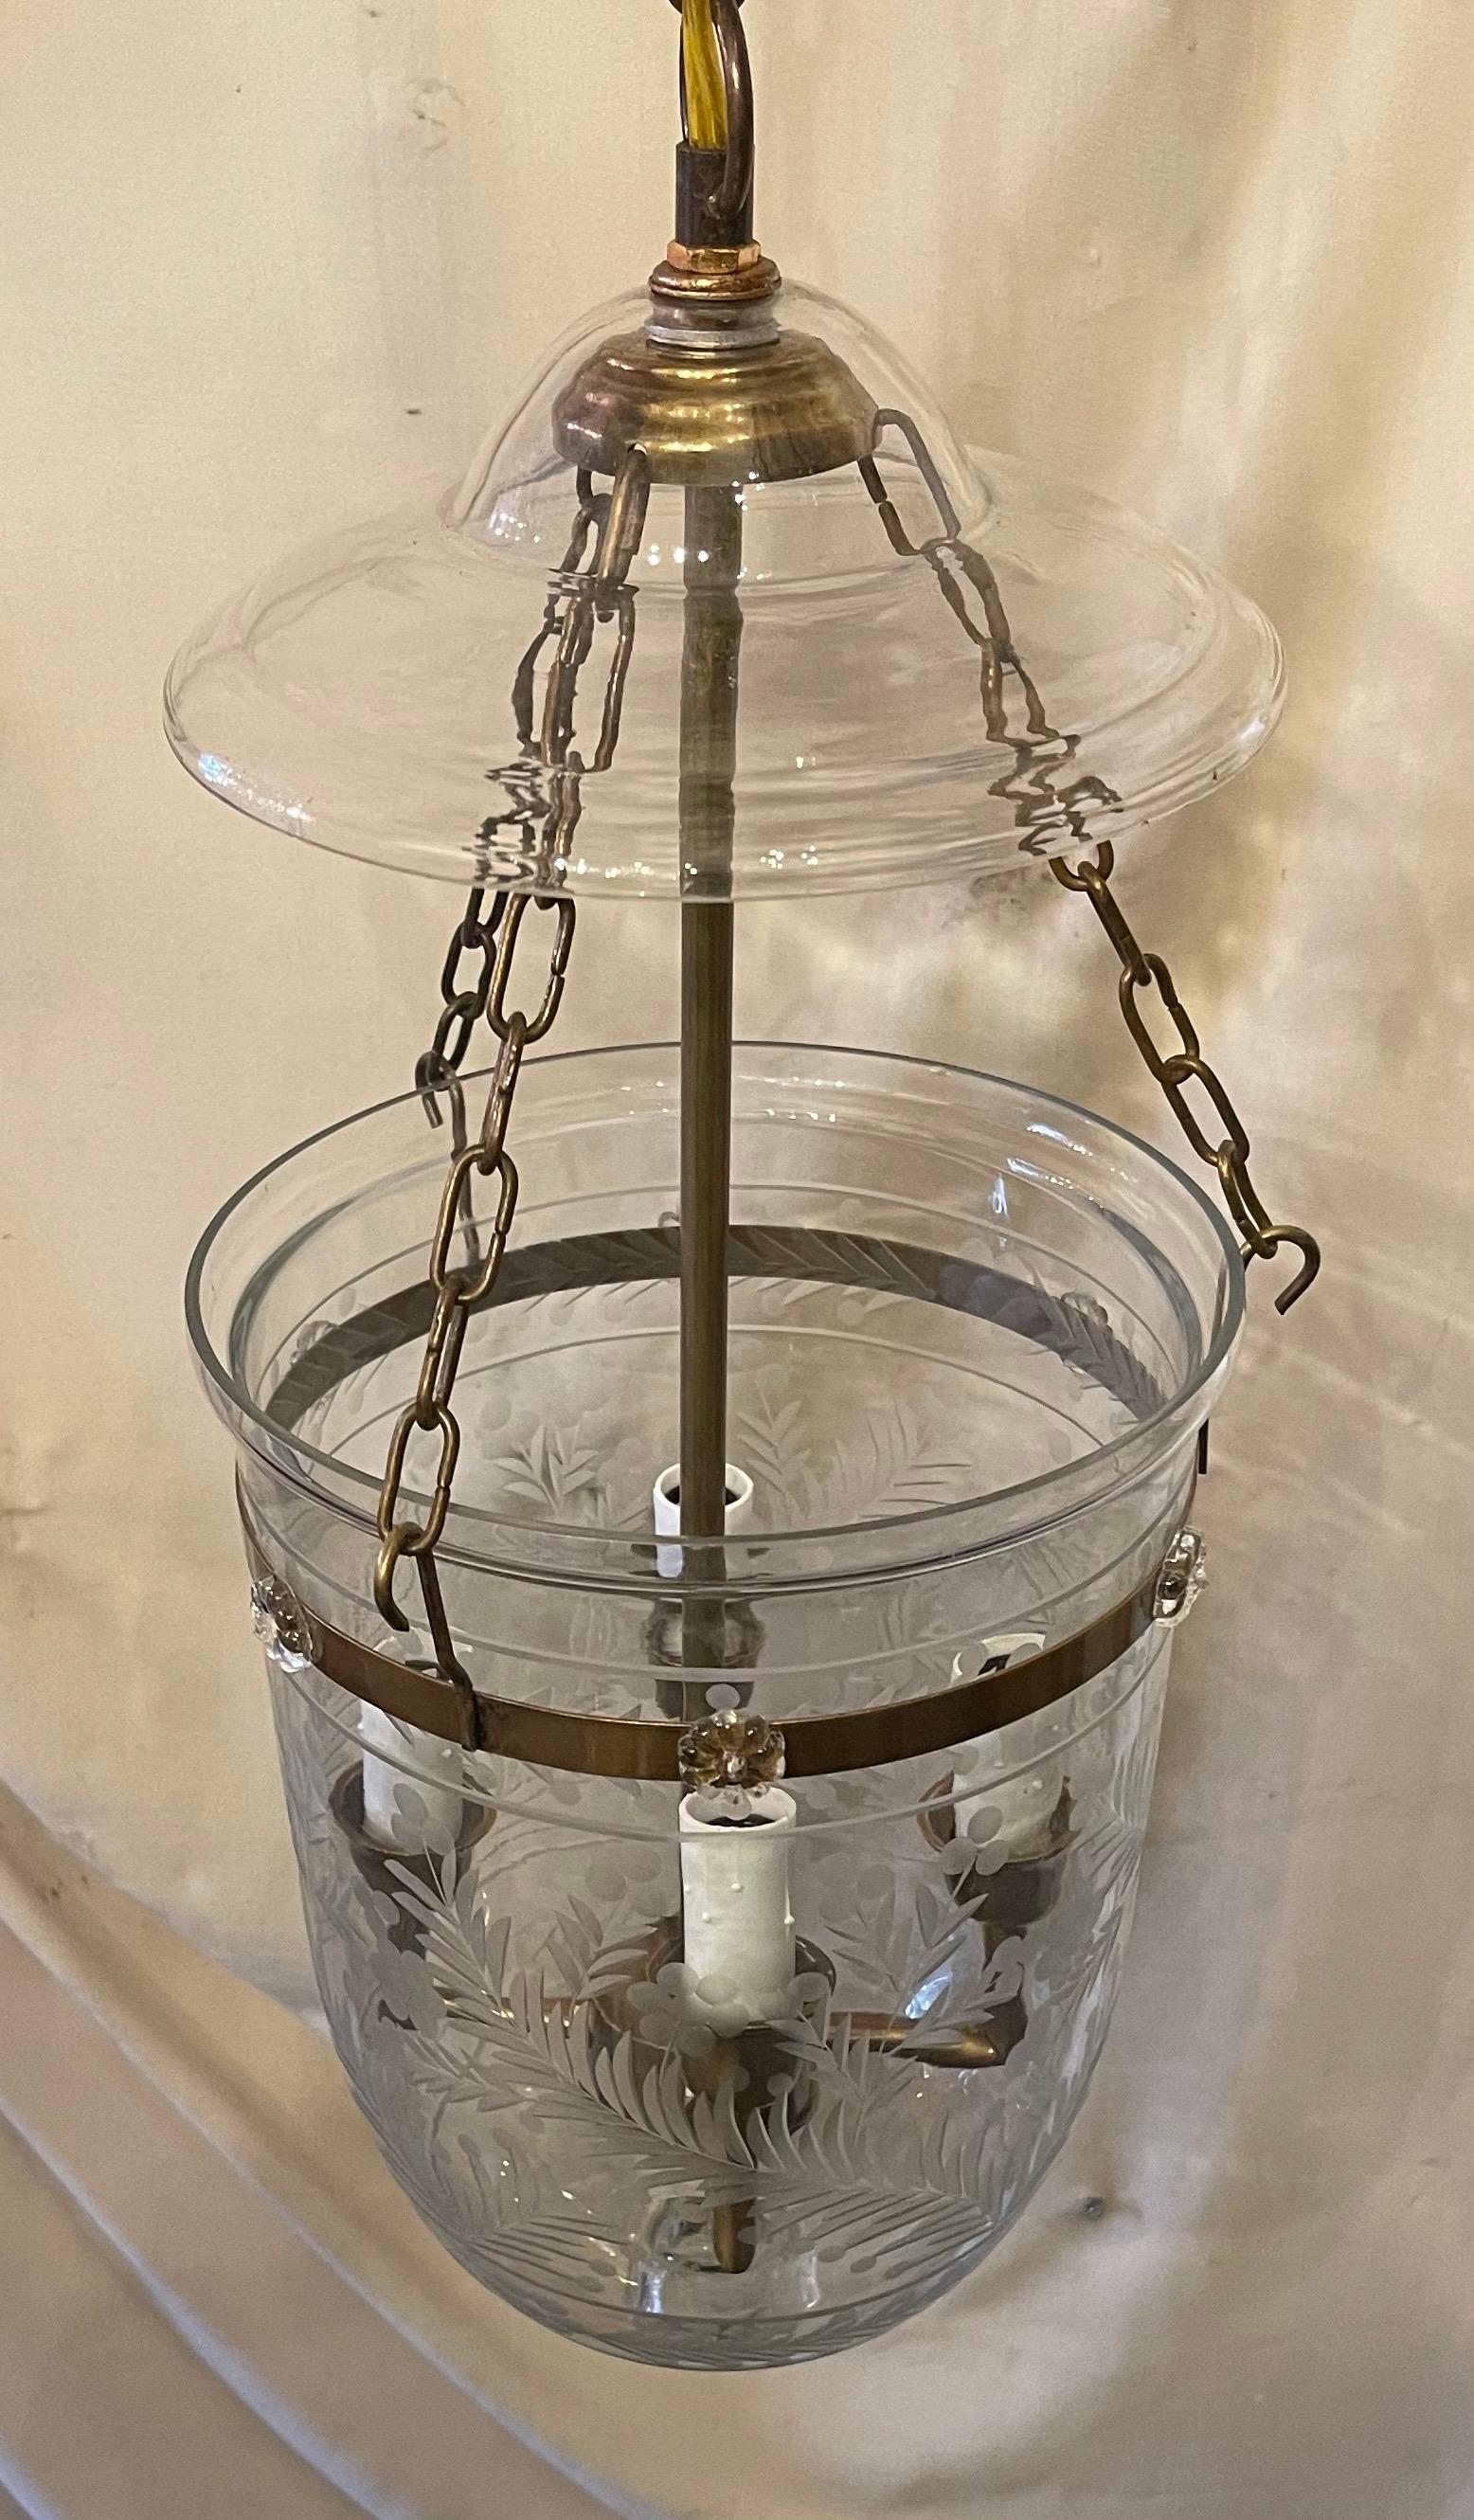 A Wonderful Etched Glass With Leaves & Flowers Bell Jar Lantern Fixture With Brass Hardware Each Light Fixture Has A 4 Candelabra Socket Cluster 

We Have 4 Available Each Sold Separately